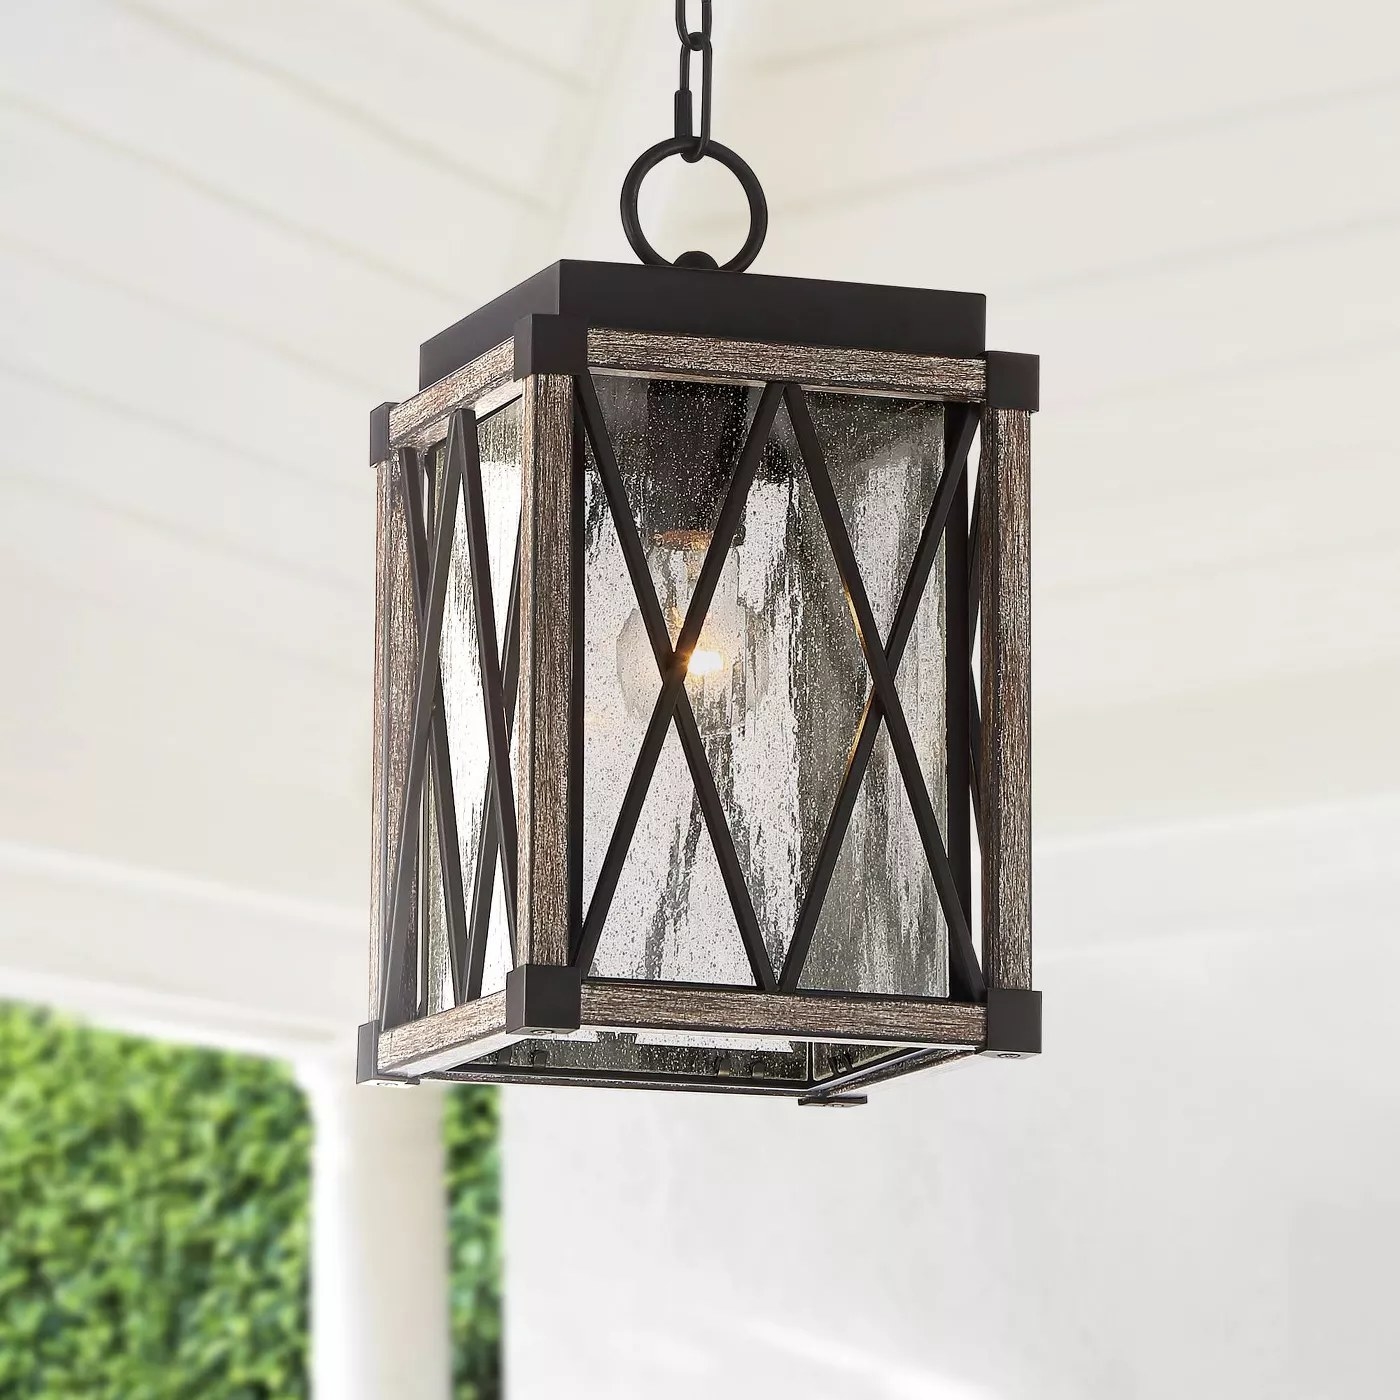 The lantern pendant with a wood and black frame and a single lightbulb hanging on a porch